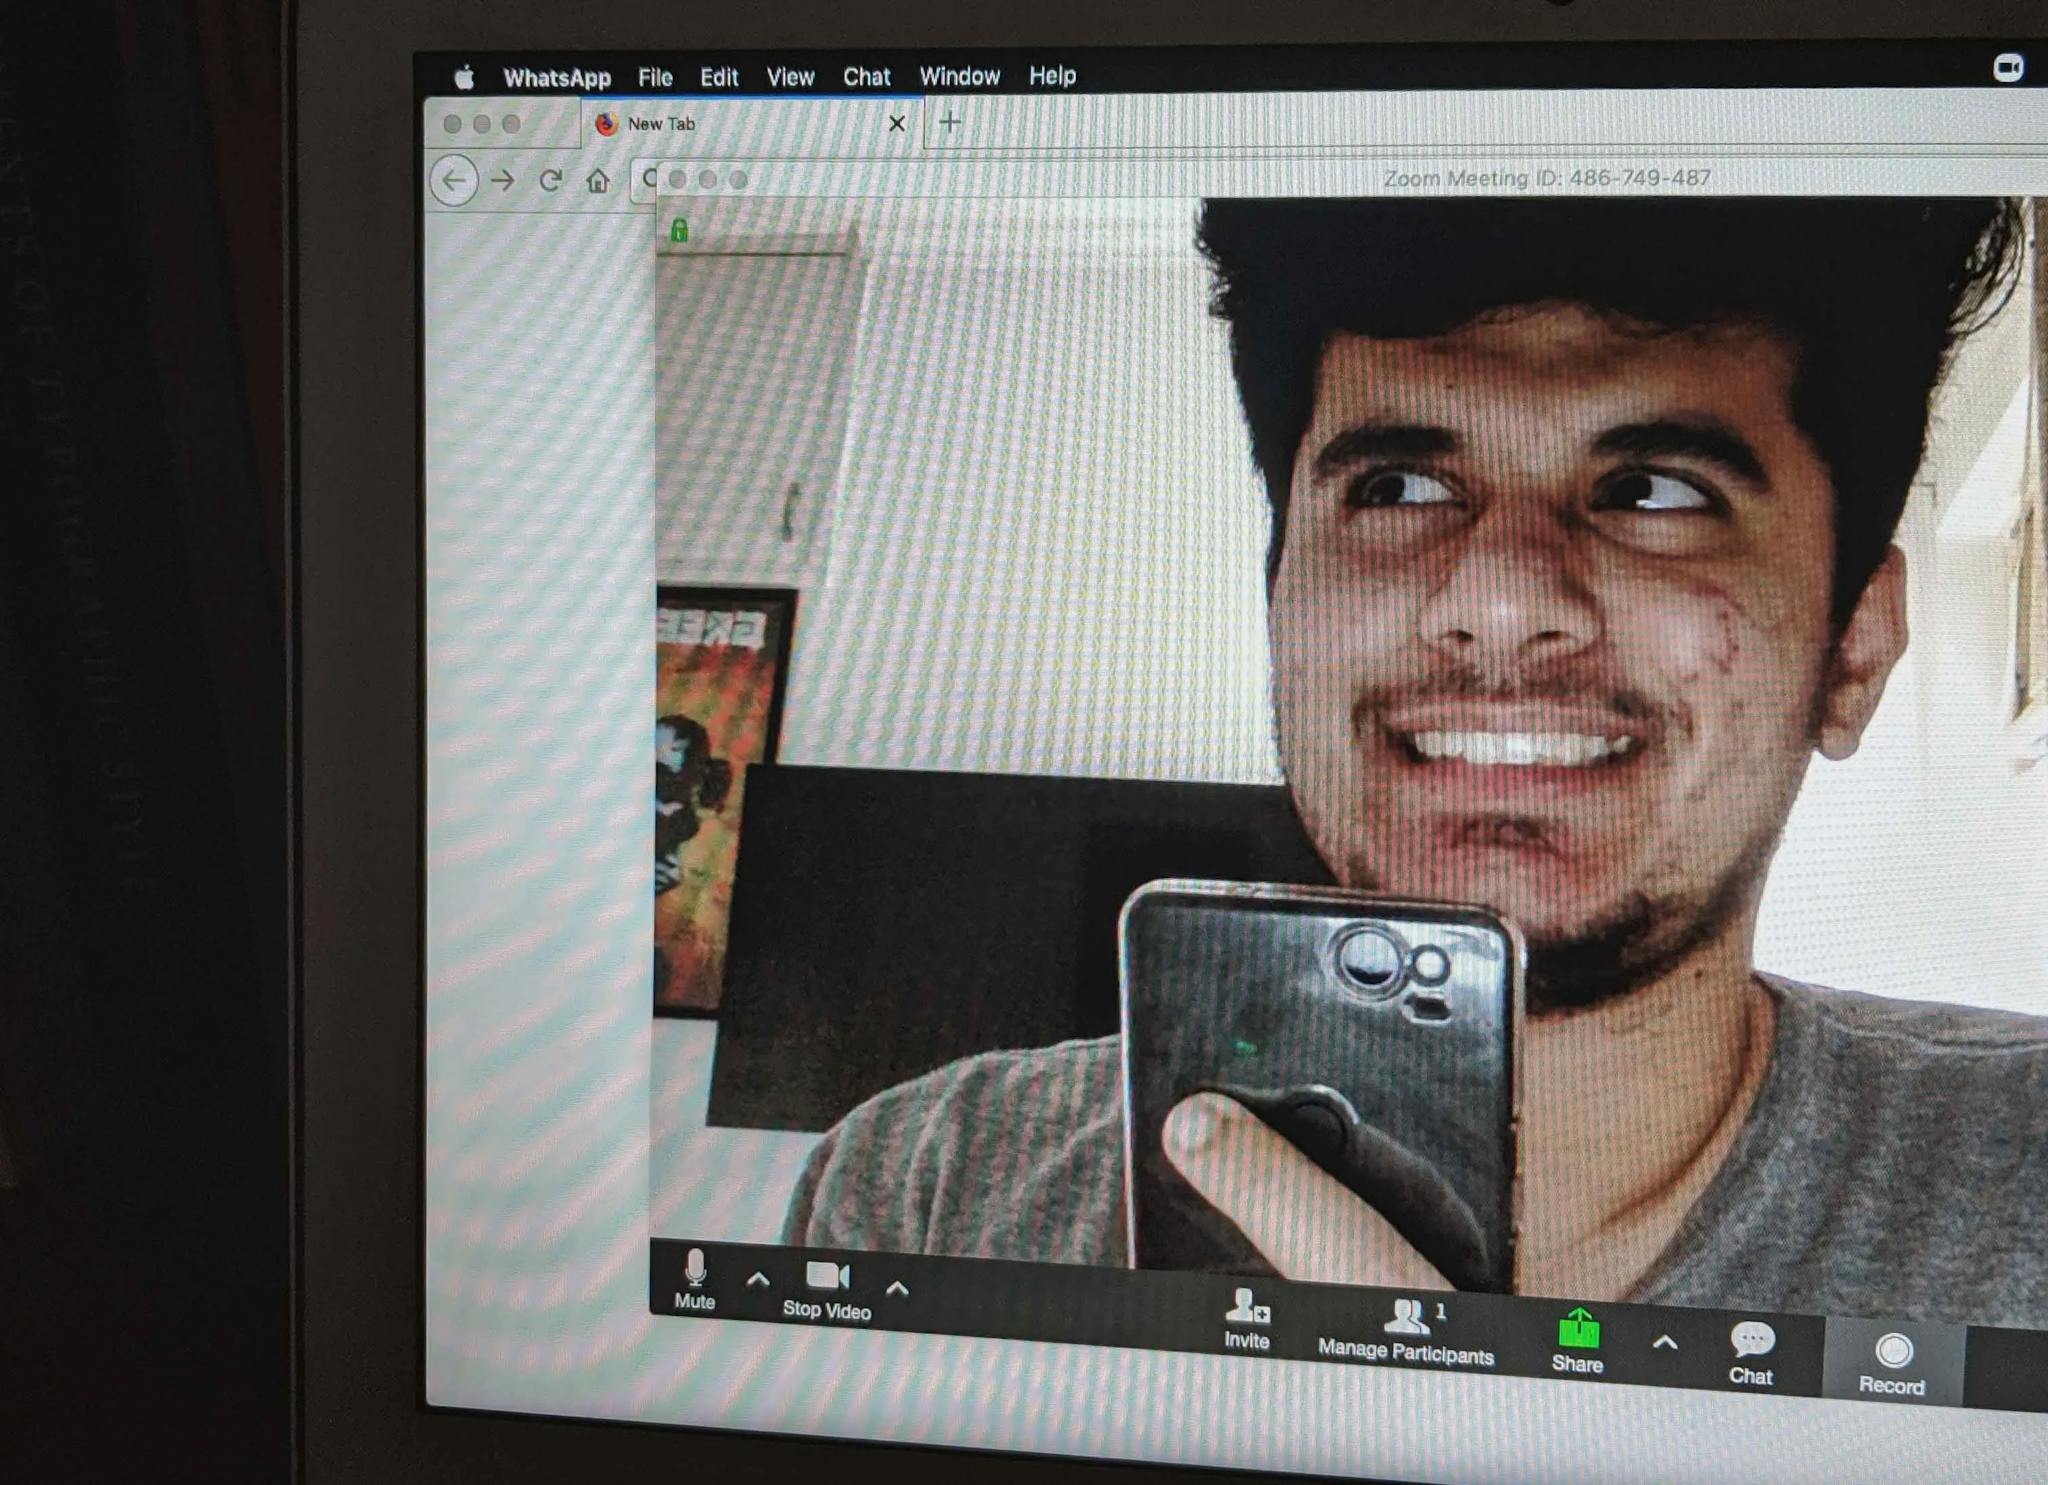 Selfie of Ratik smiling waiting for a Zoom call to begin